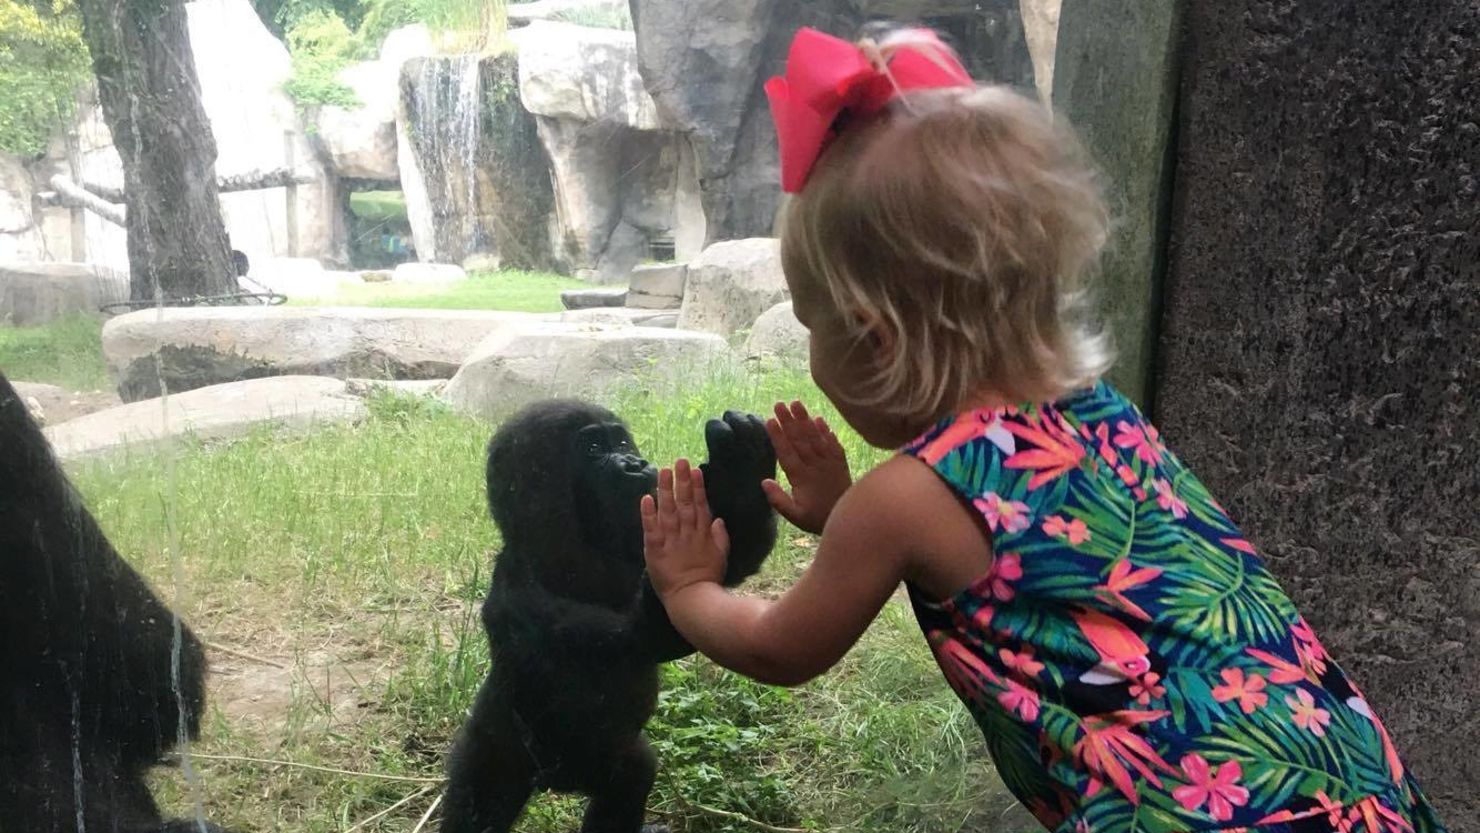 Baby gorilla, Gus and little girl named Braylee share cute moment at Fort Worth Zoo.